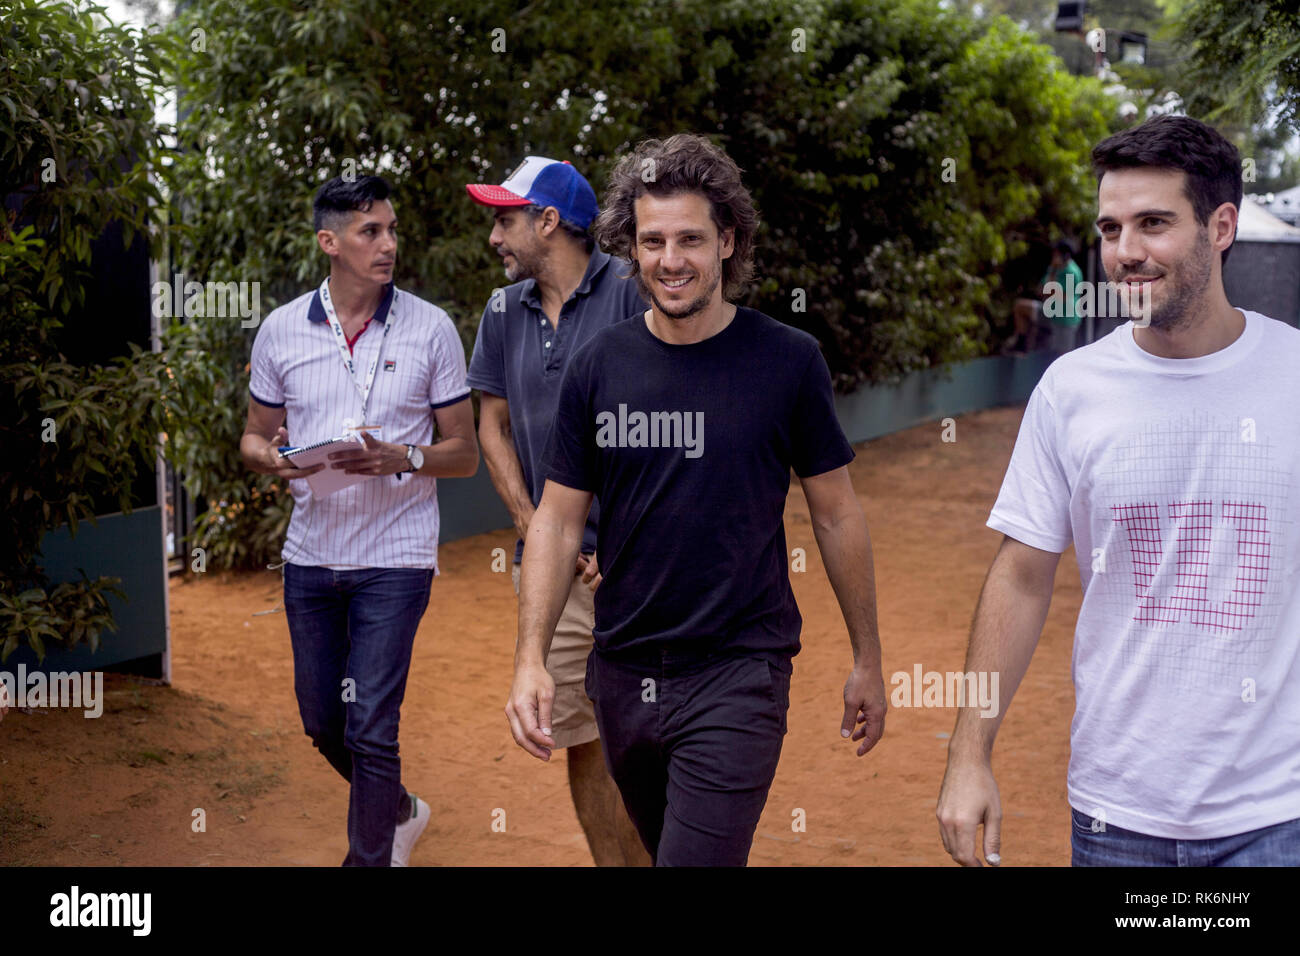 Buenos Aires, Federal Capital, Argentina. 9th Feb, 2019. Former Argentine professional tennis player GastÃ³n Gaudio present at the Argentina Open 2019 Credit: Roberto Almeida Aveledo/ZUMA Wire/Alamy Live News Stock Photo